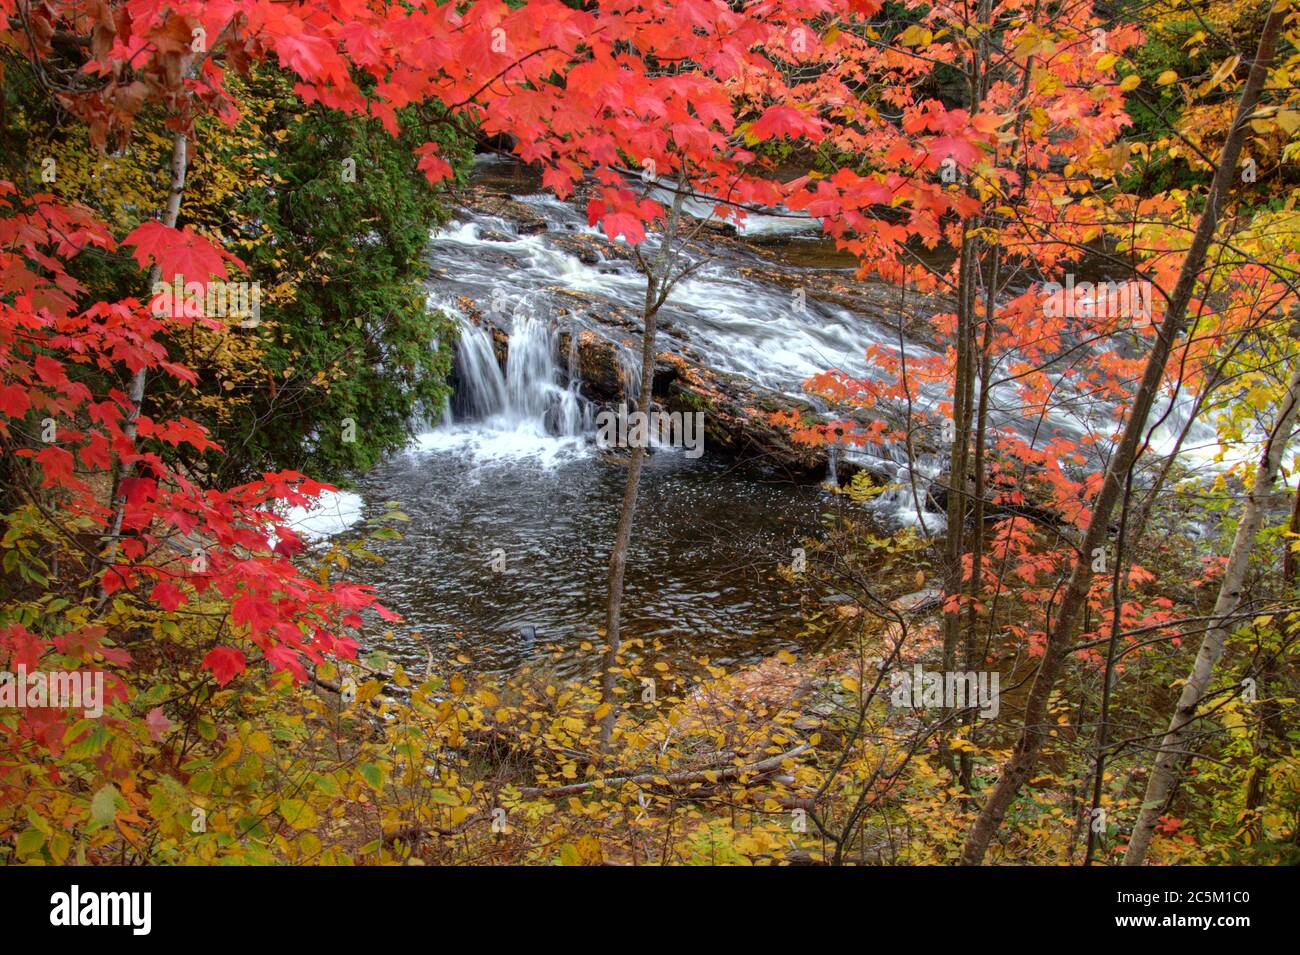 Michigan waterfall framed by vibrant fall colors on the Falls River in the Upper Peninsula town of L'Anse. Stock Photo